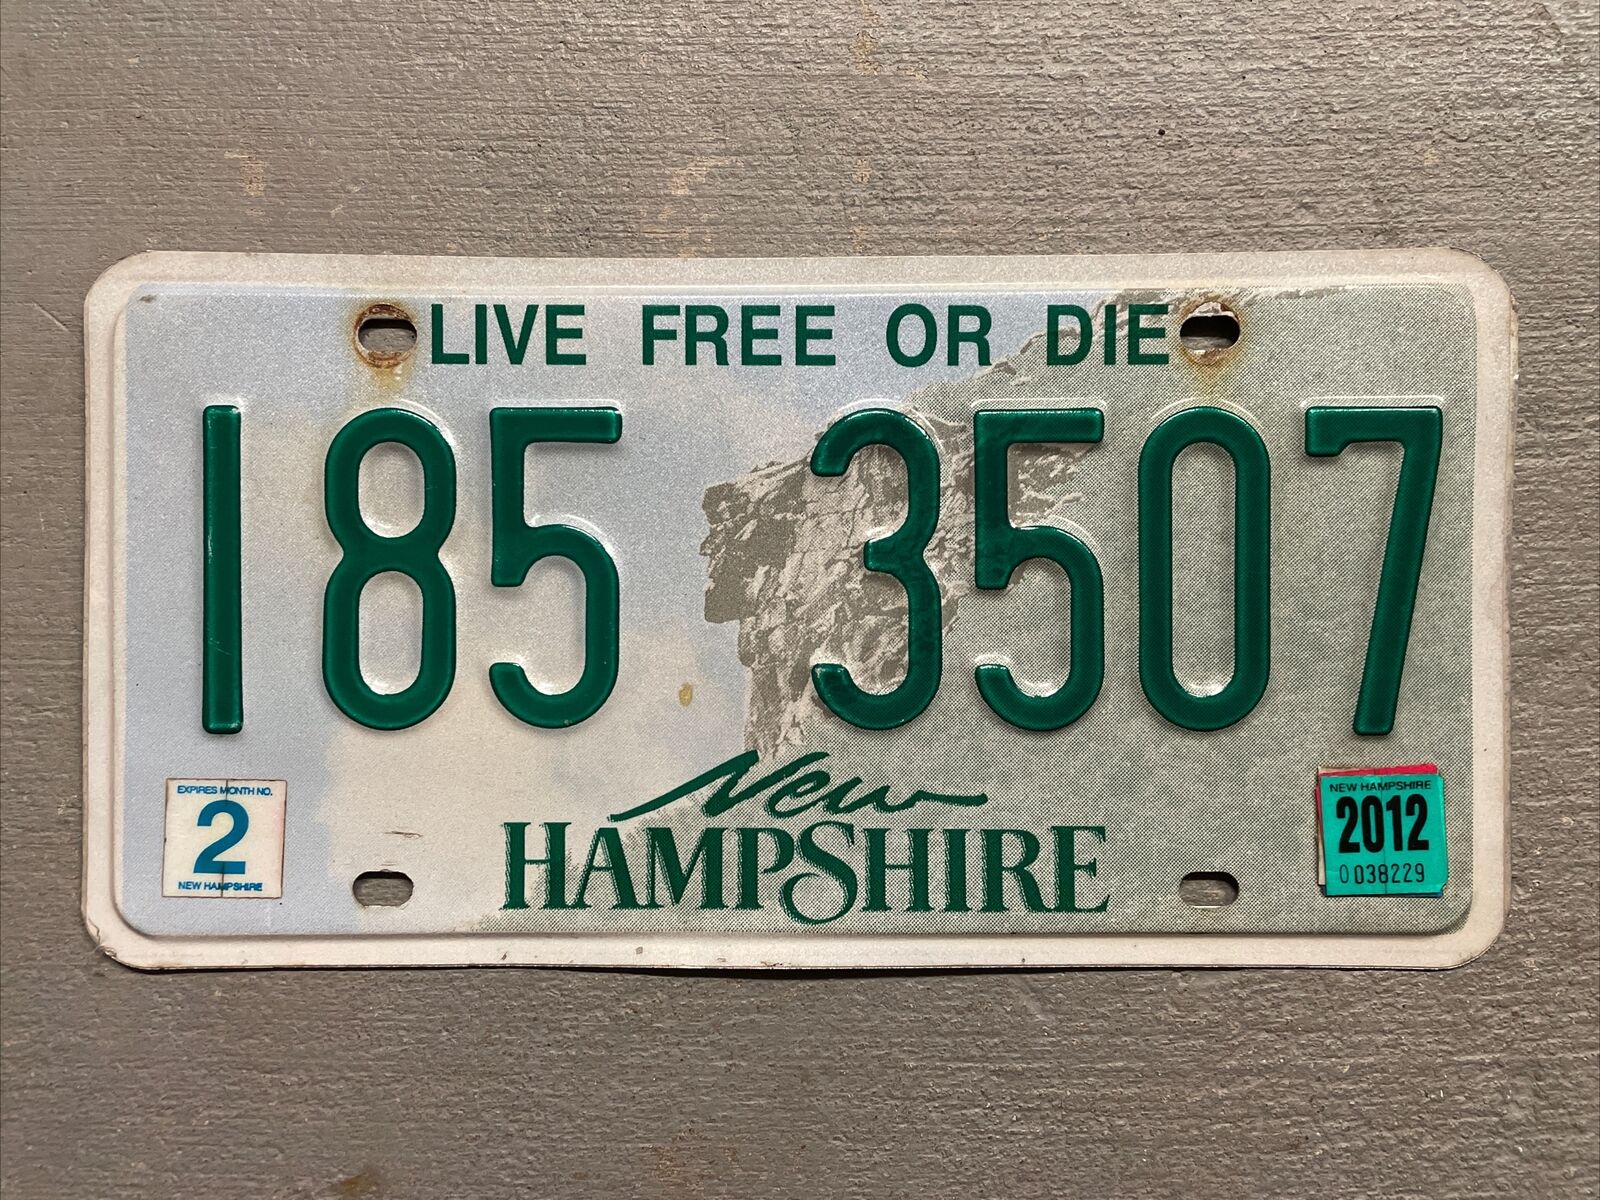 NEW HAMPSHIRE LICENSE PLATE OLD MAN MOUNTAIN RANDOM LETTERS/NUMBERS FAIR